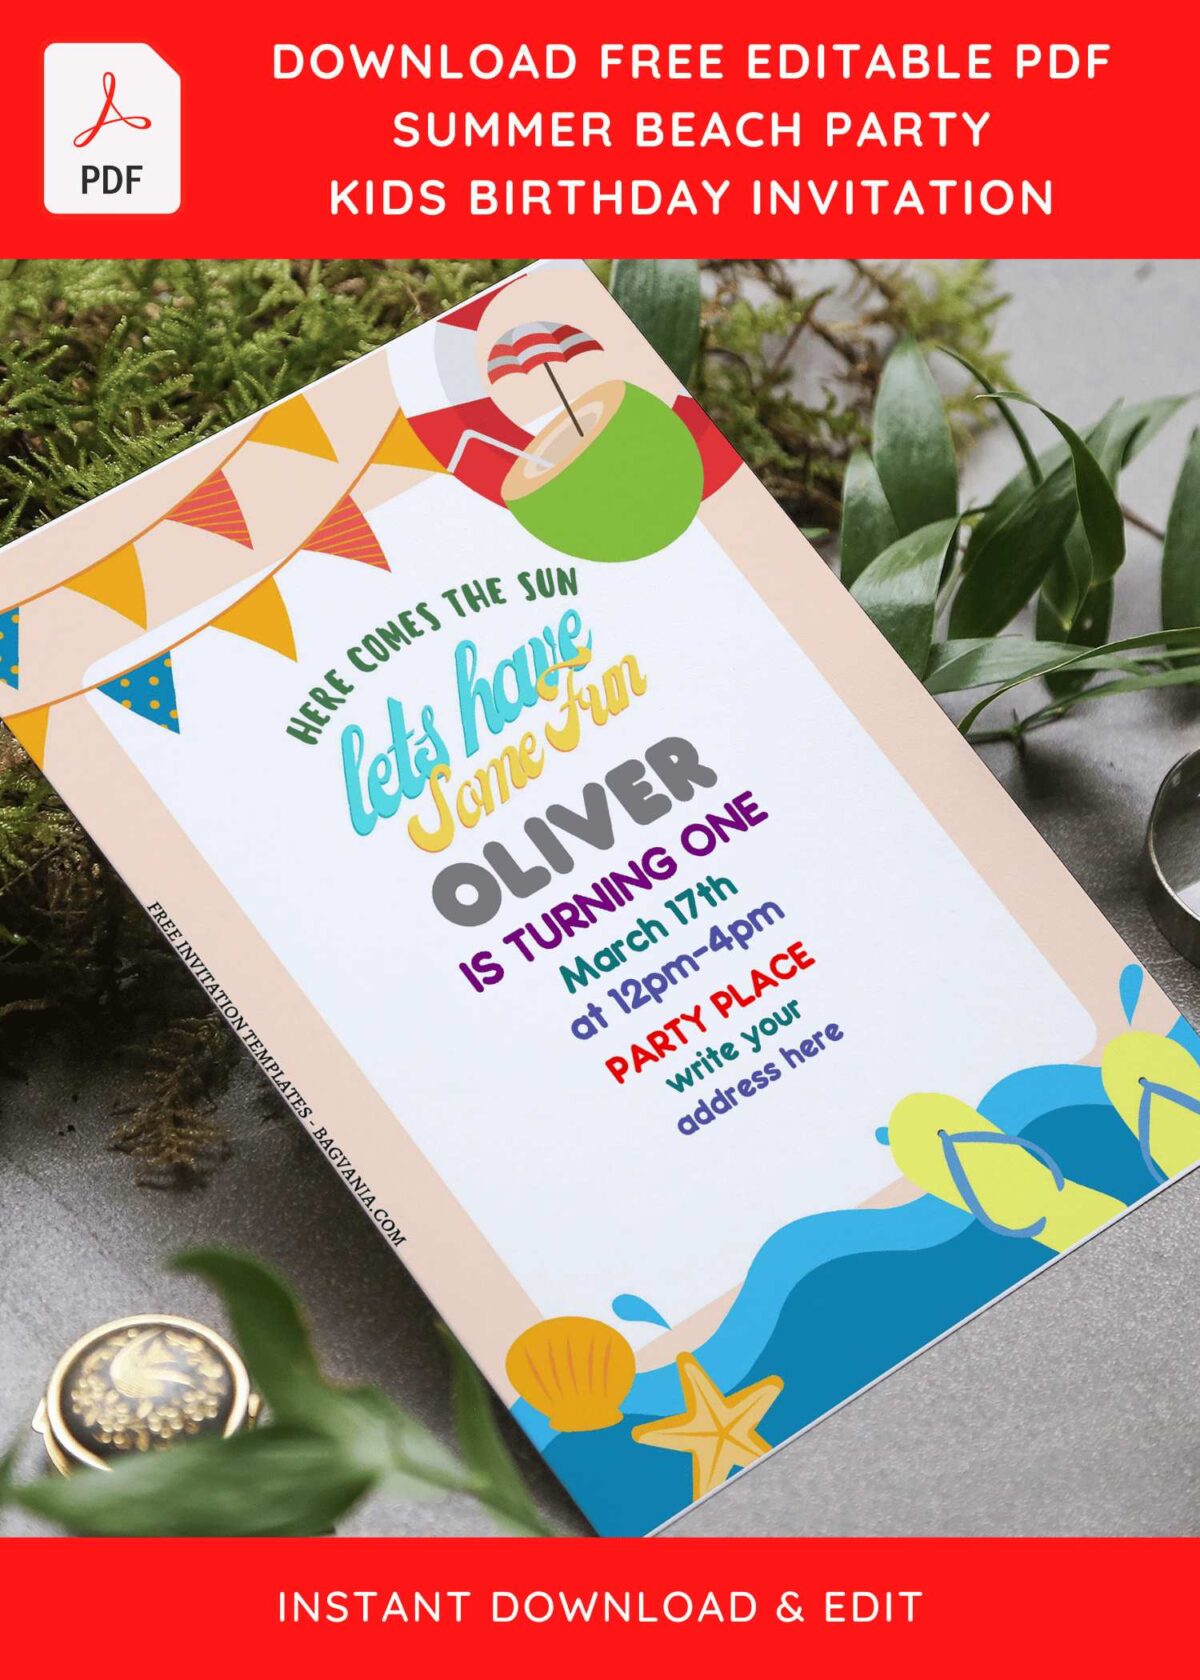 (Free Editable PDF) Lovely Summer Beach Birthday Invitation Templates with colorful bunting flag